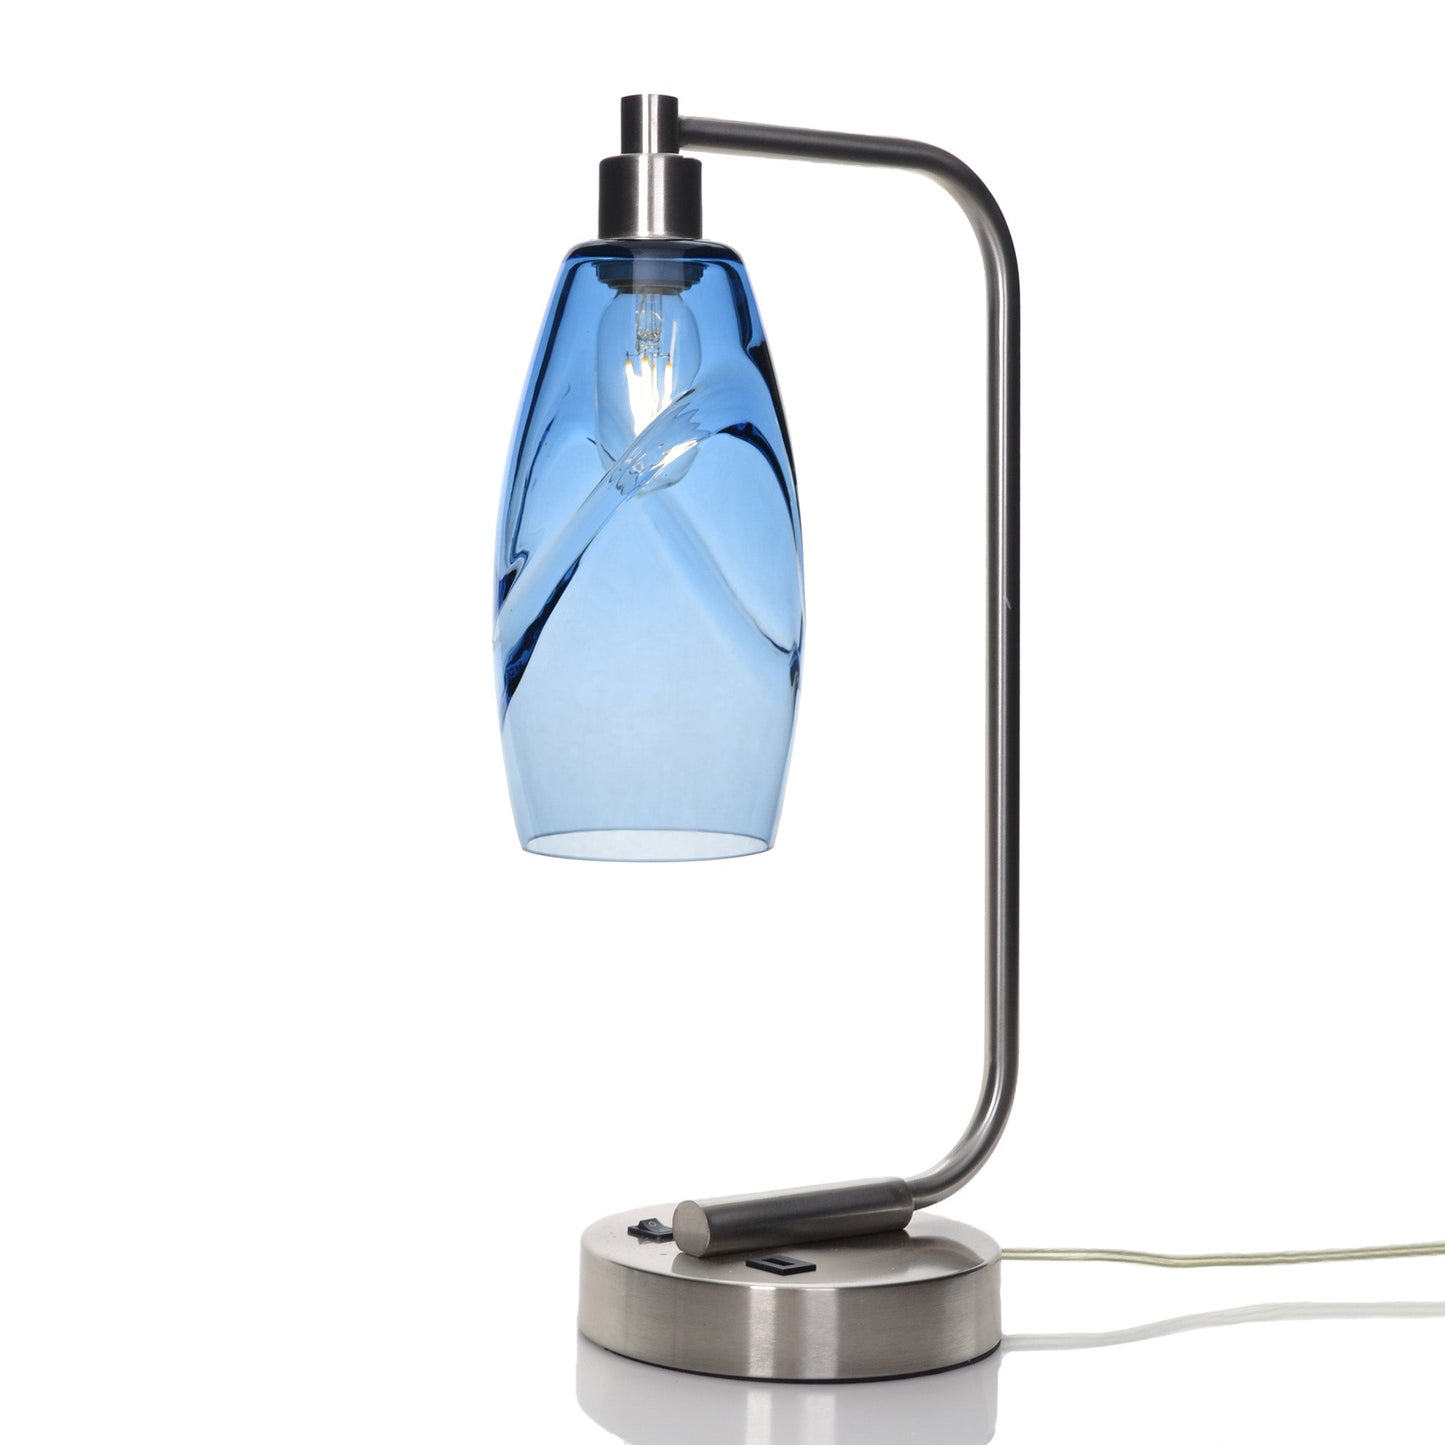 147 Swell: Table Lamp-Glass-Bicycle Glass Co - Hotshop-Steel Blue-Brushed Nickel-4 Watt LED (+$0.00)-Bicycle Glass Co